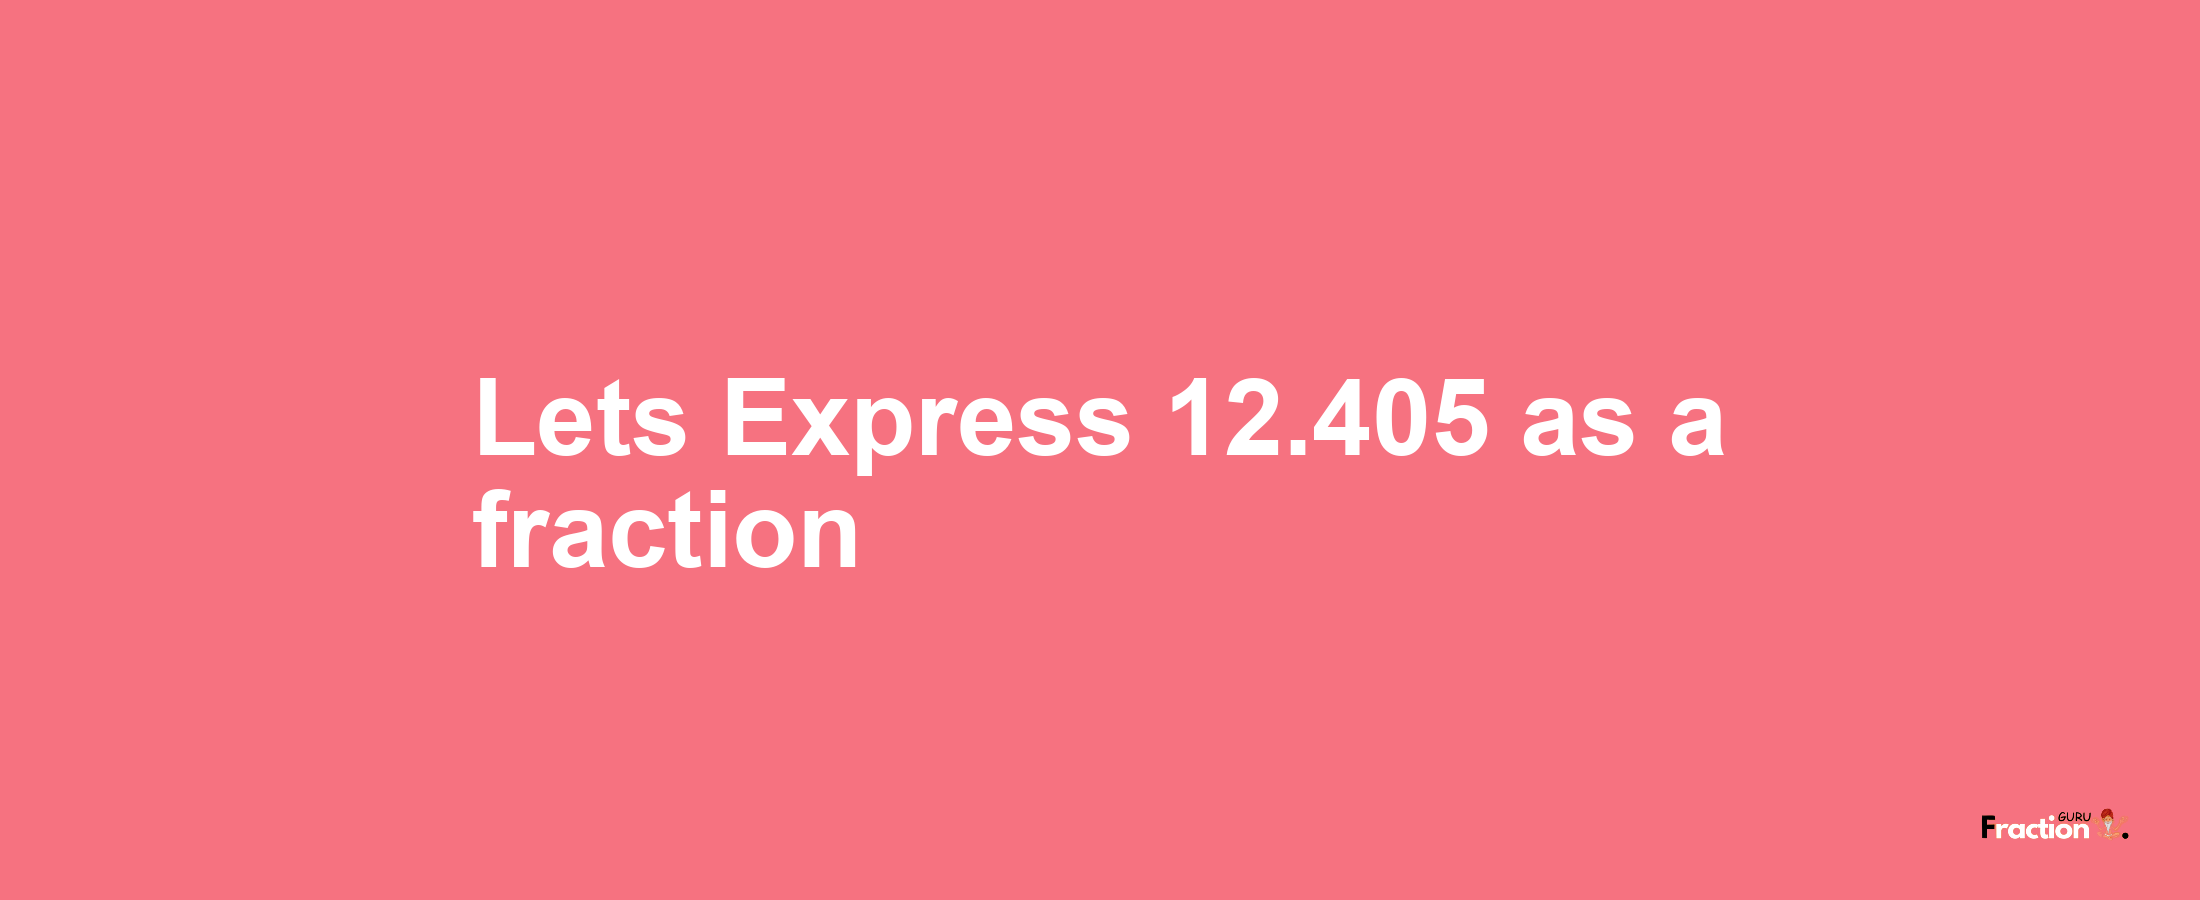 Lets Express 12.405 as afraction